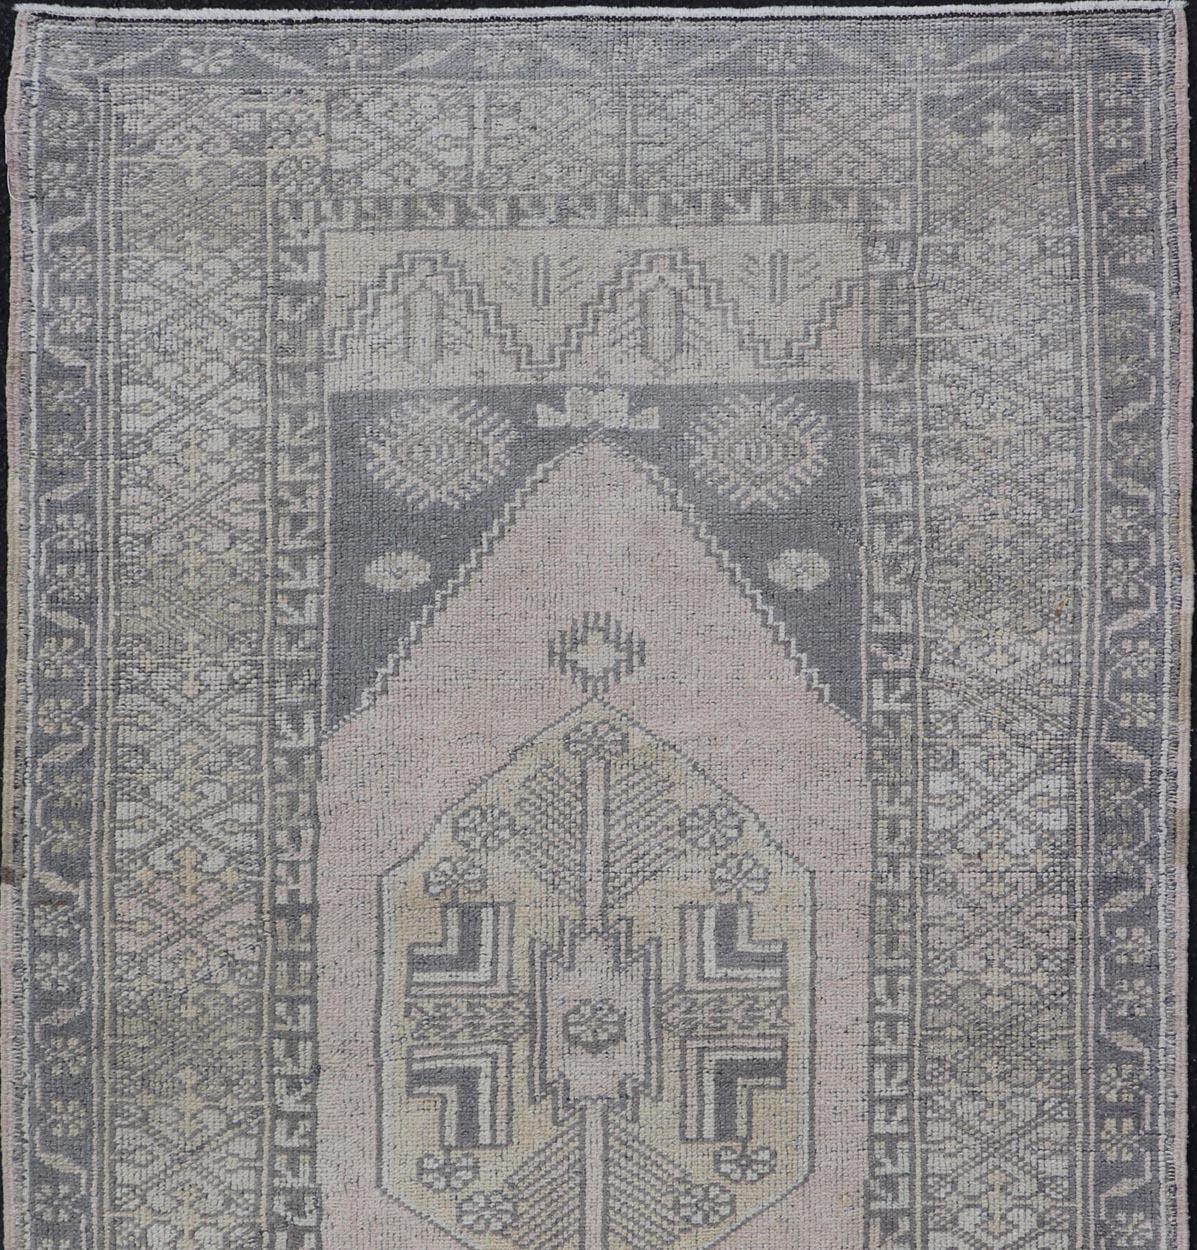 Turkish Vintage Oushak Rug in Muted Taupe, Gray, Cream, and Blush For Sale 5